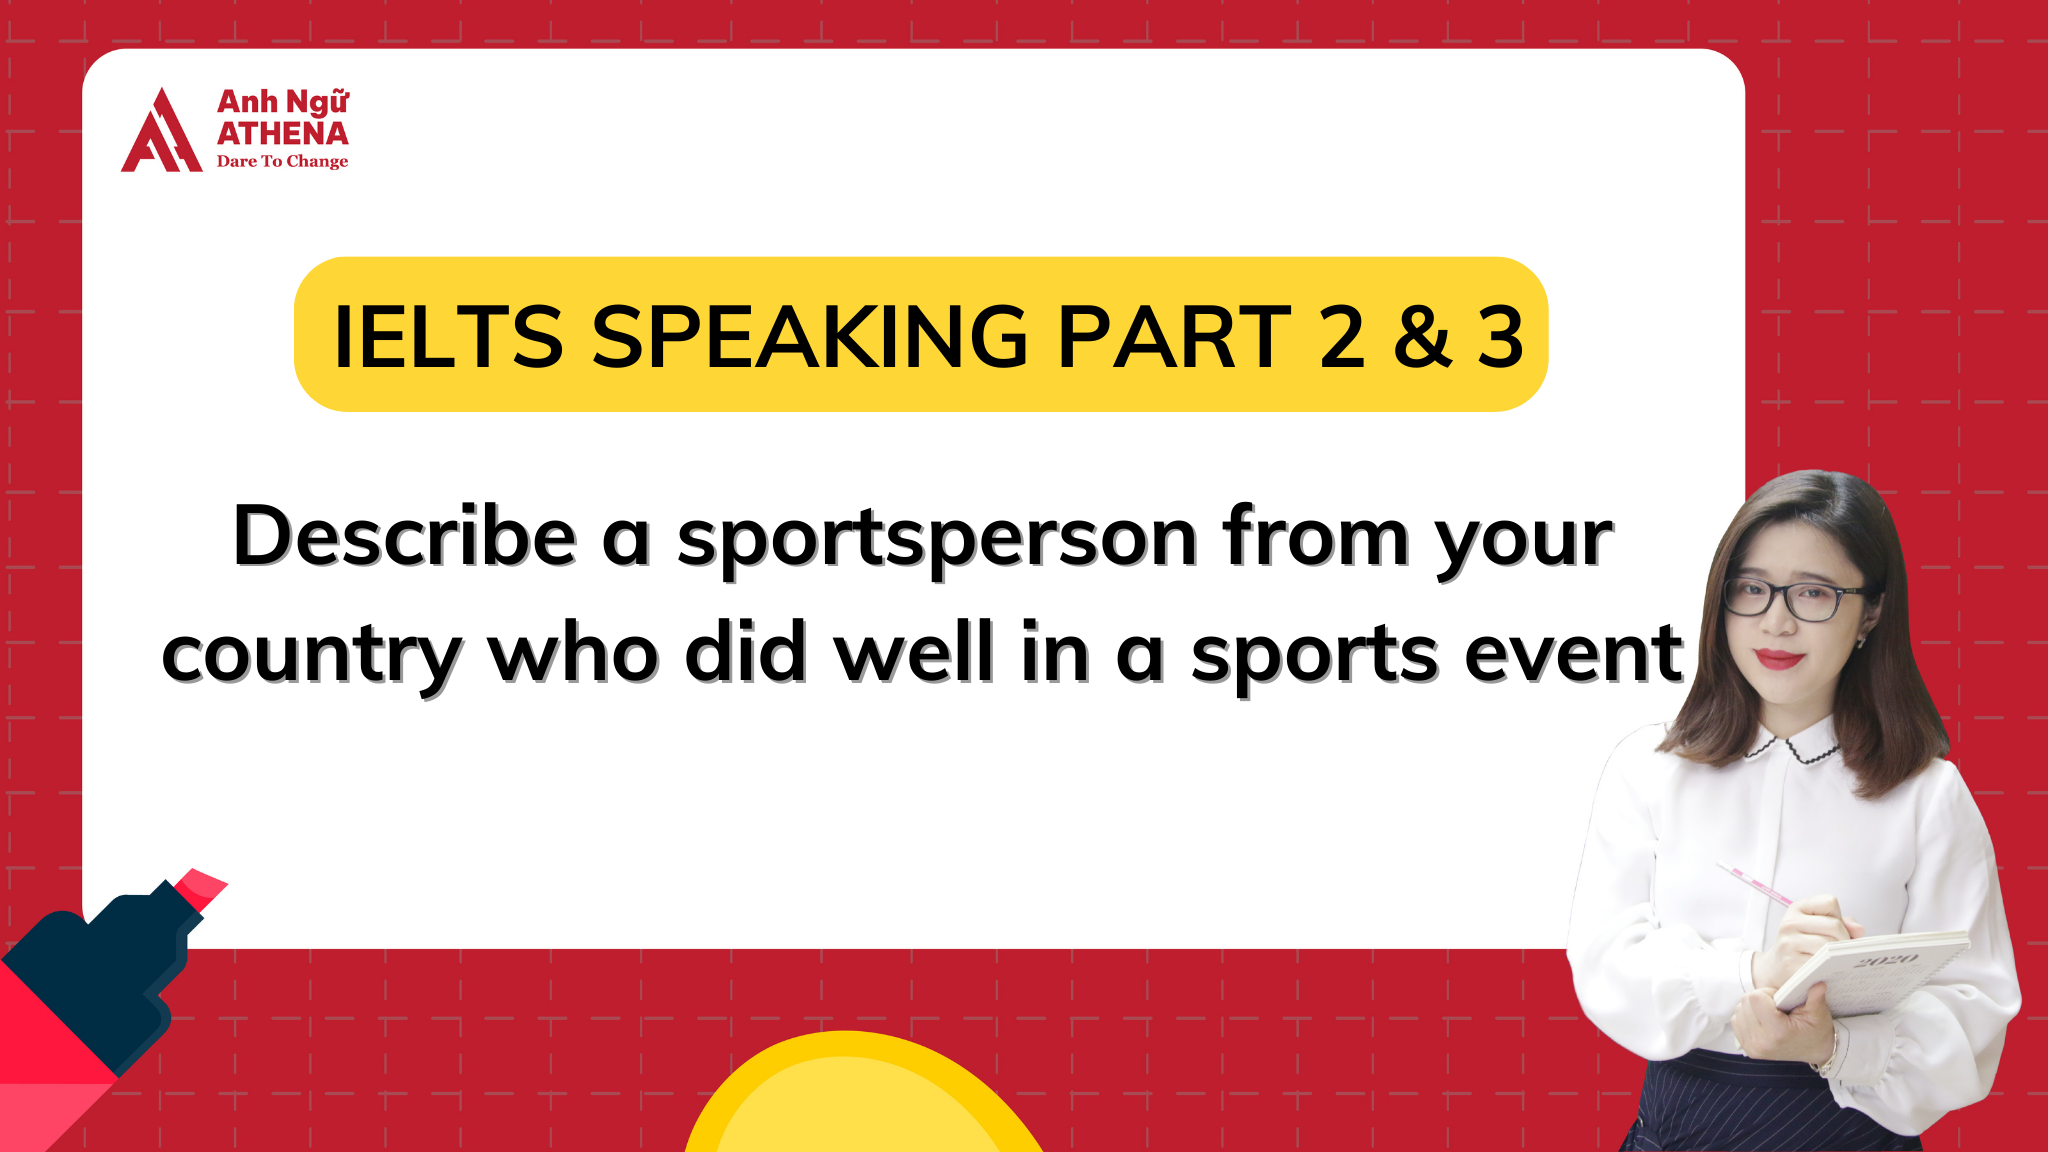 IELTS SPEAKING PART 2 & 3 Describe a sportsperson from your country who did well in a sports event